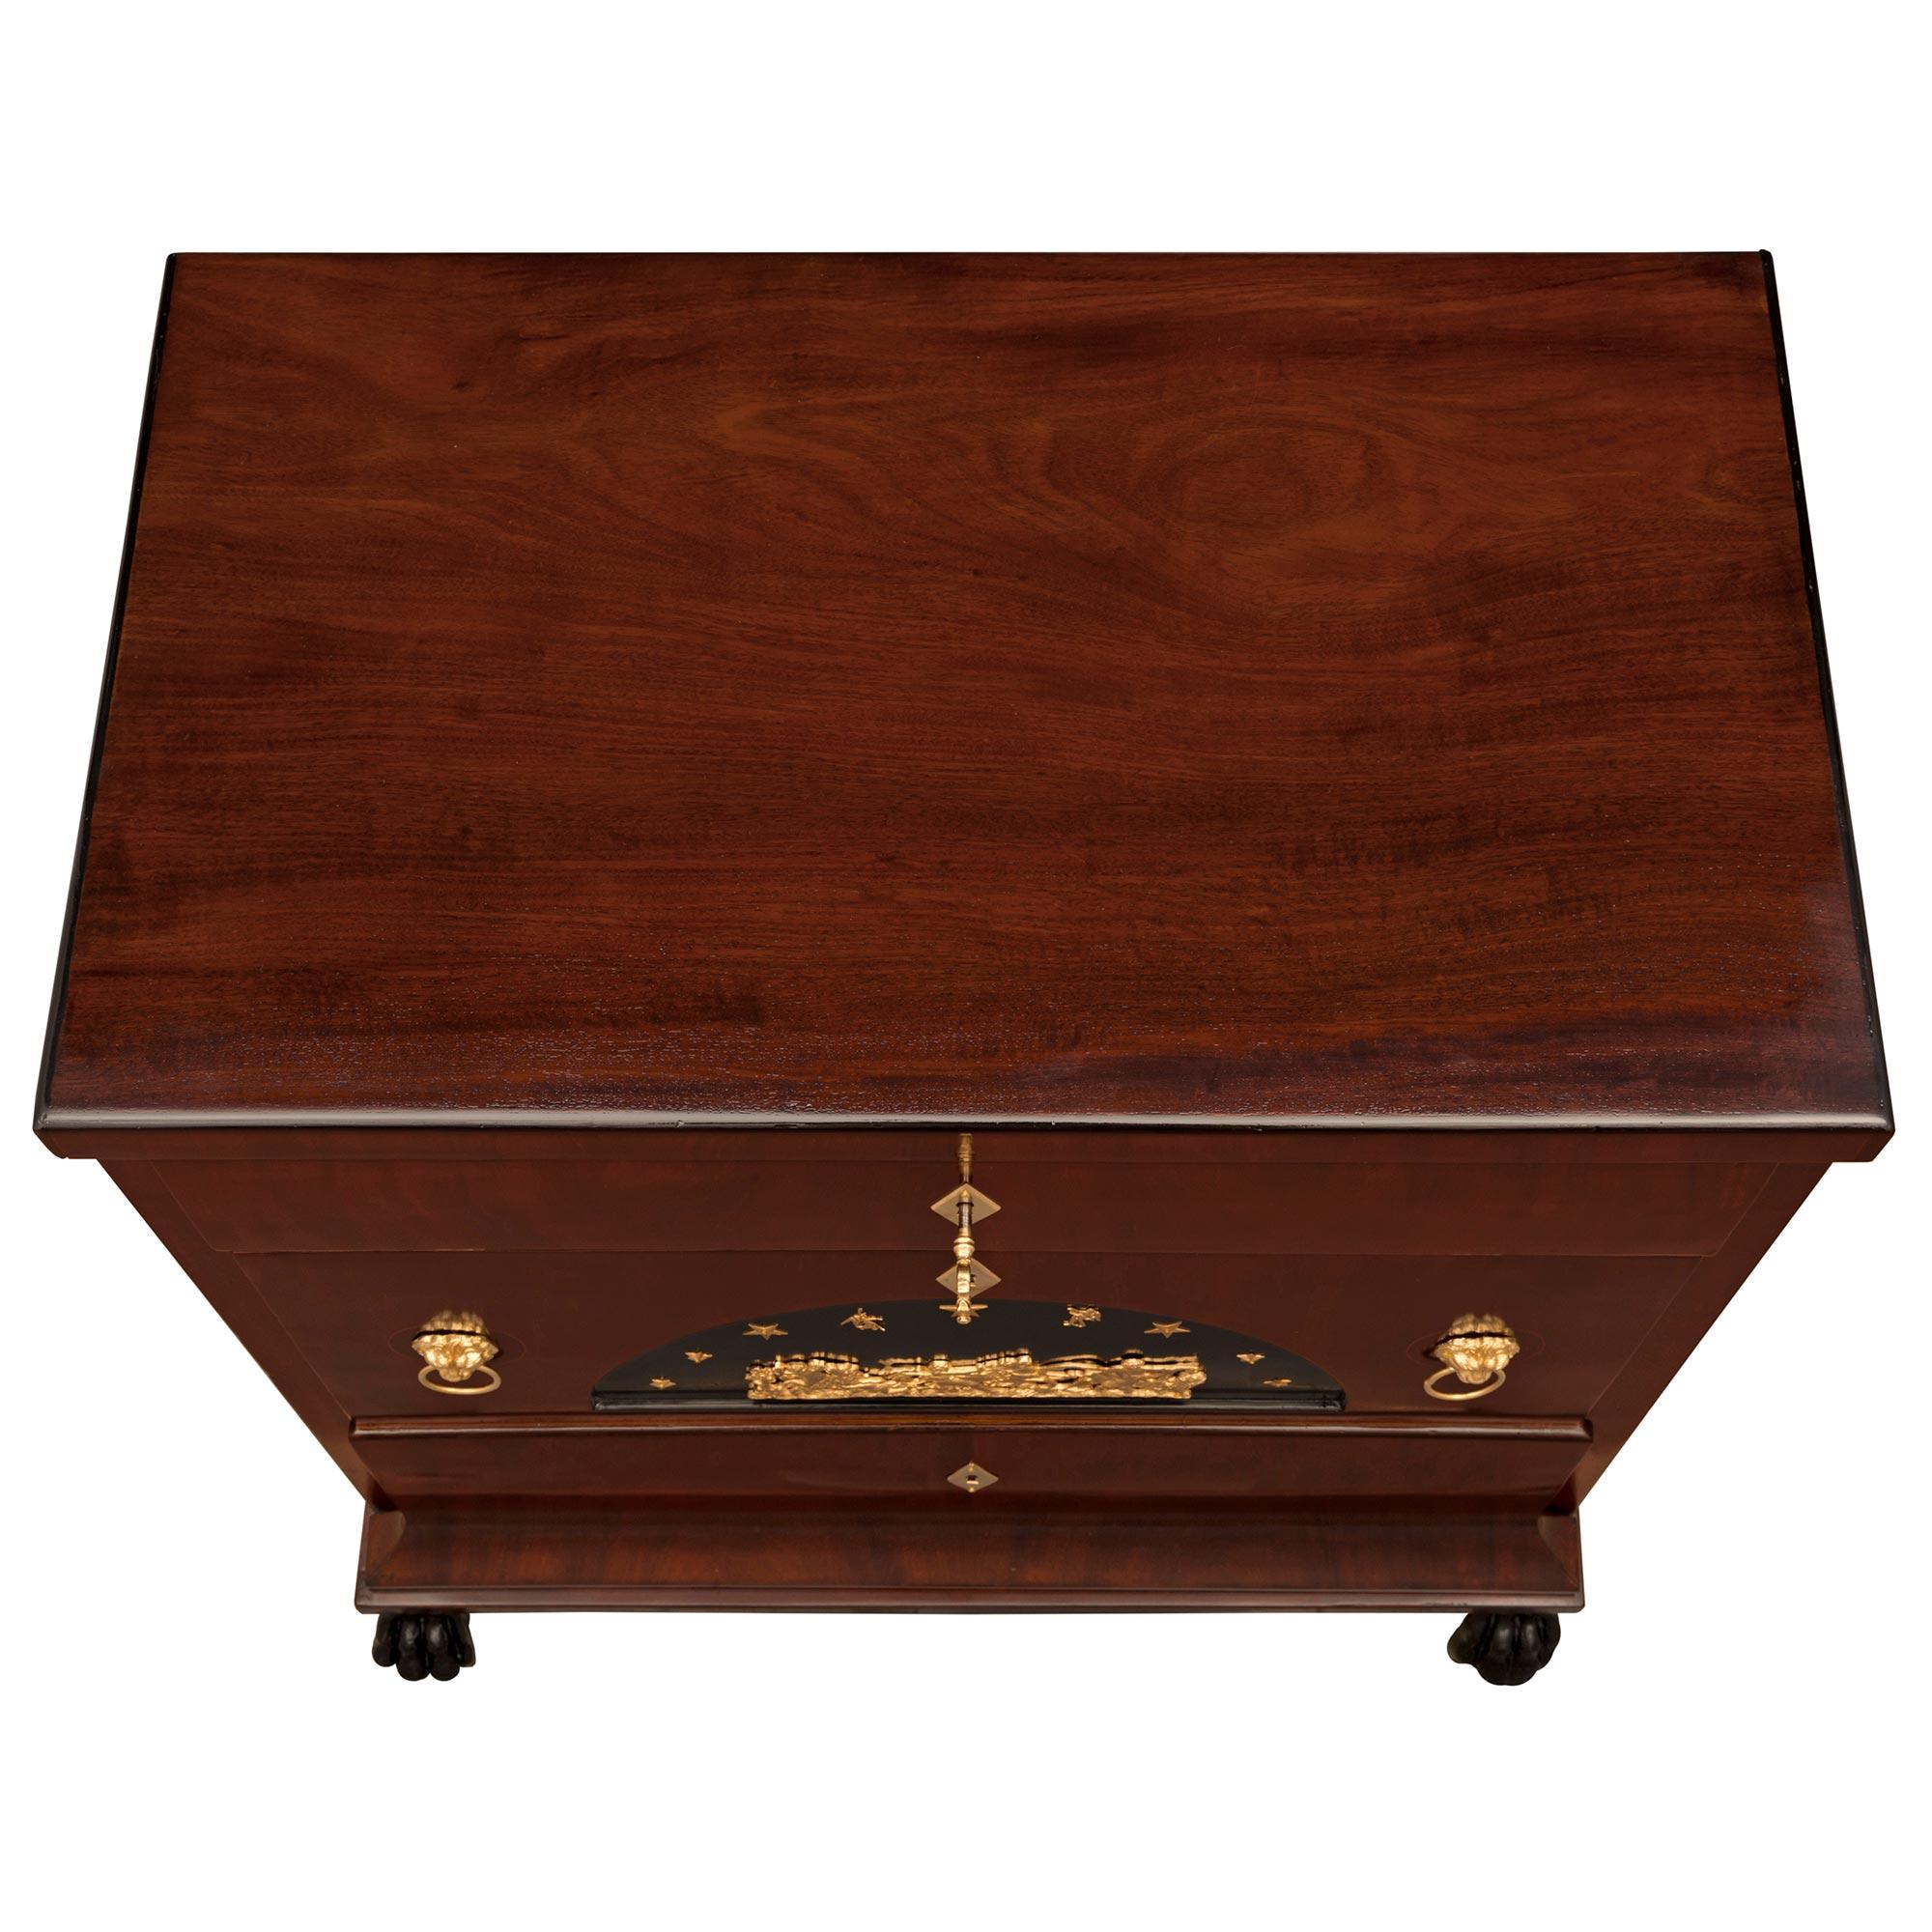 A sensational and extremely decorative pair of Italian 19th century Neo-Classical st. flamed Mahogany, Maplewood, Olivewood ebonized Fruitwood and ormolu chests. The his and hers pair of three drawer chests are raised by handsome richly carved paw